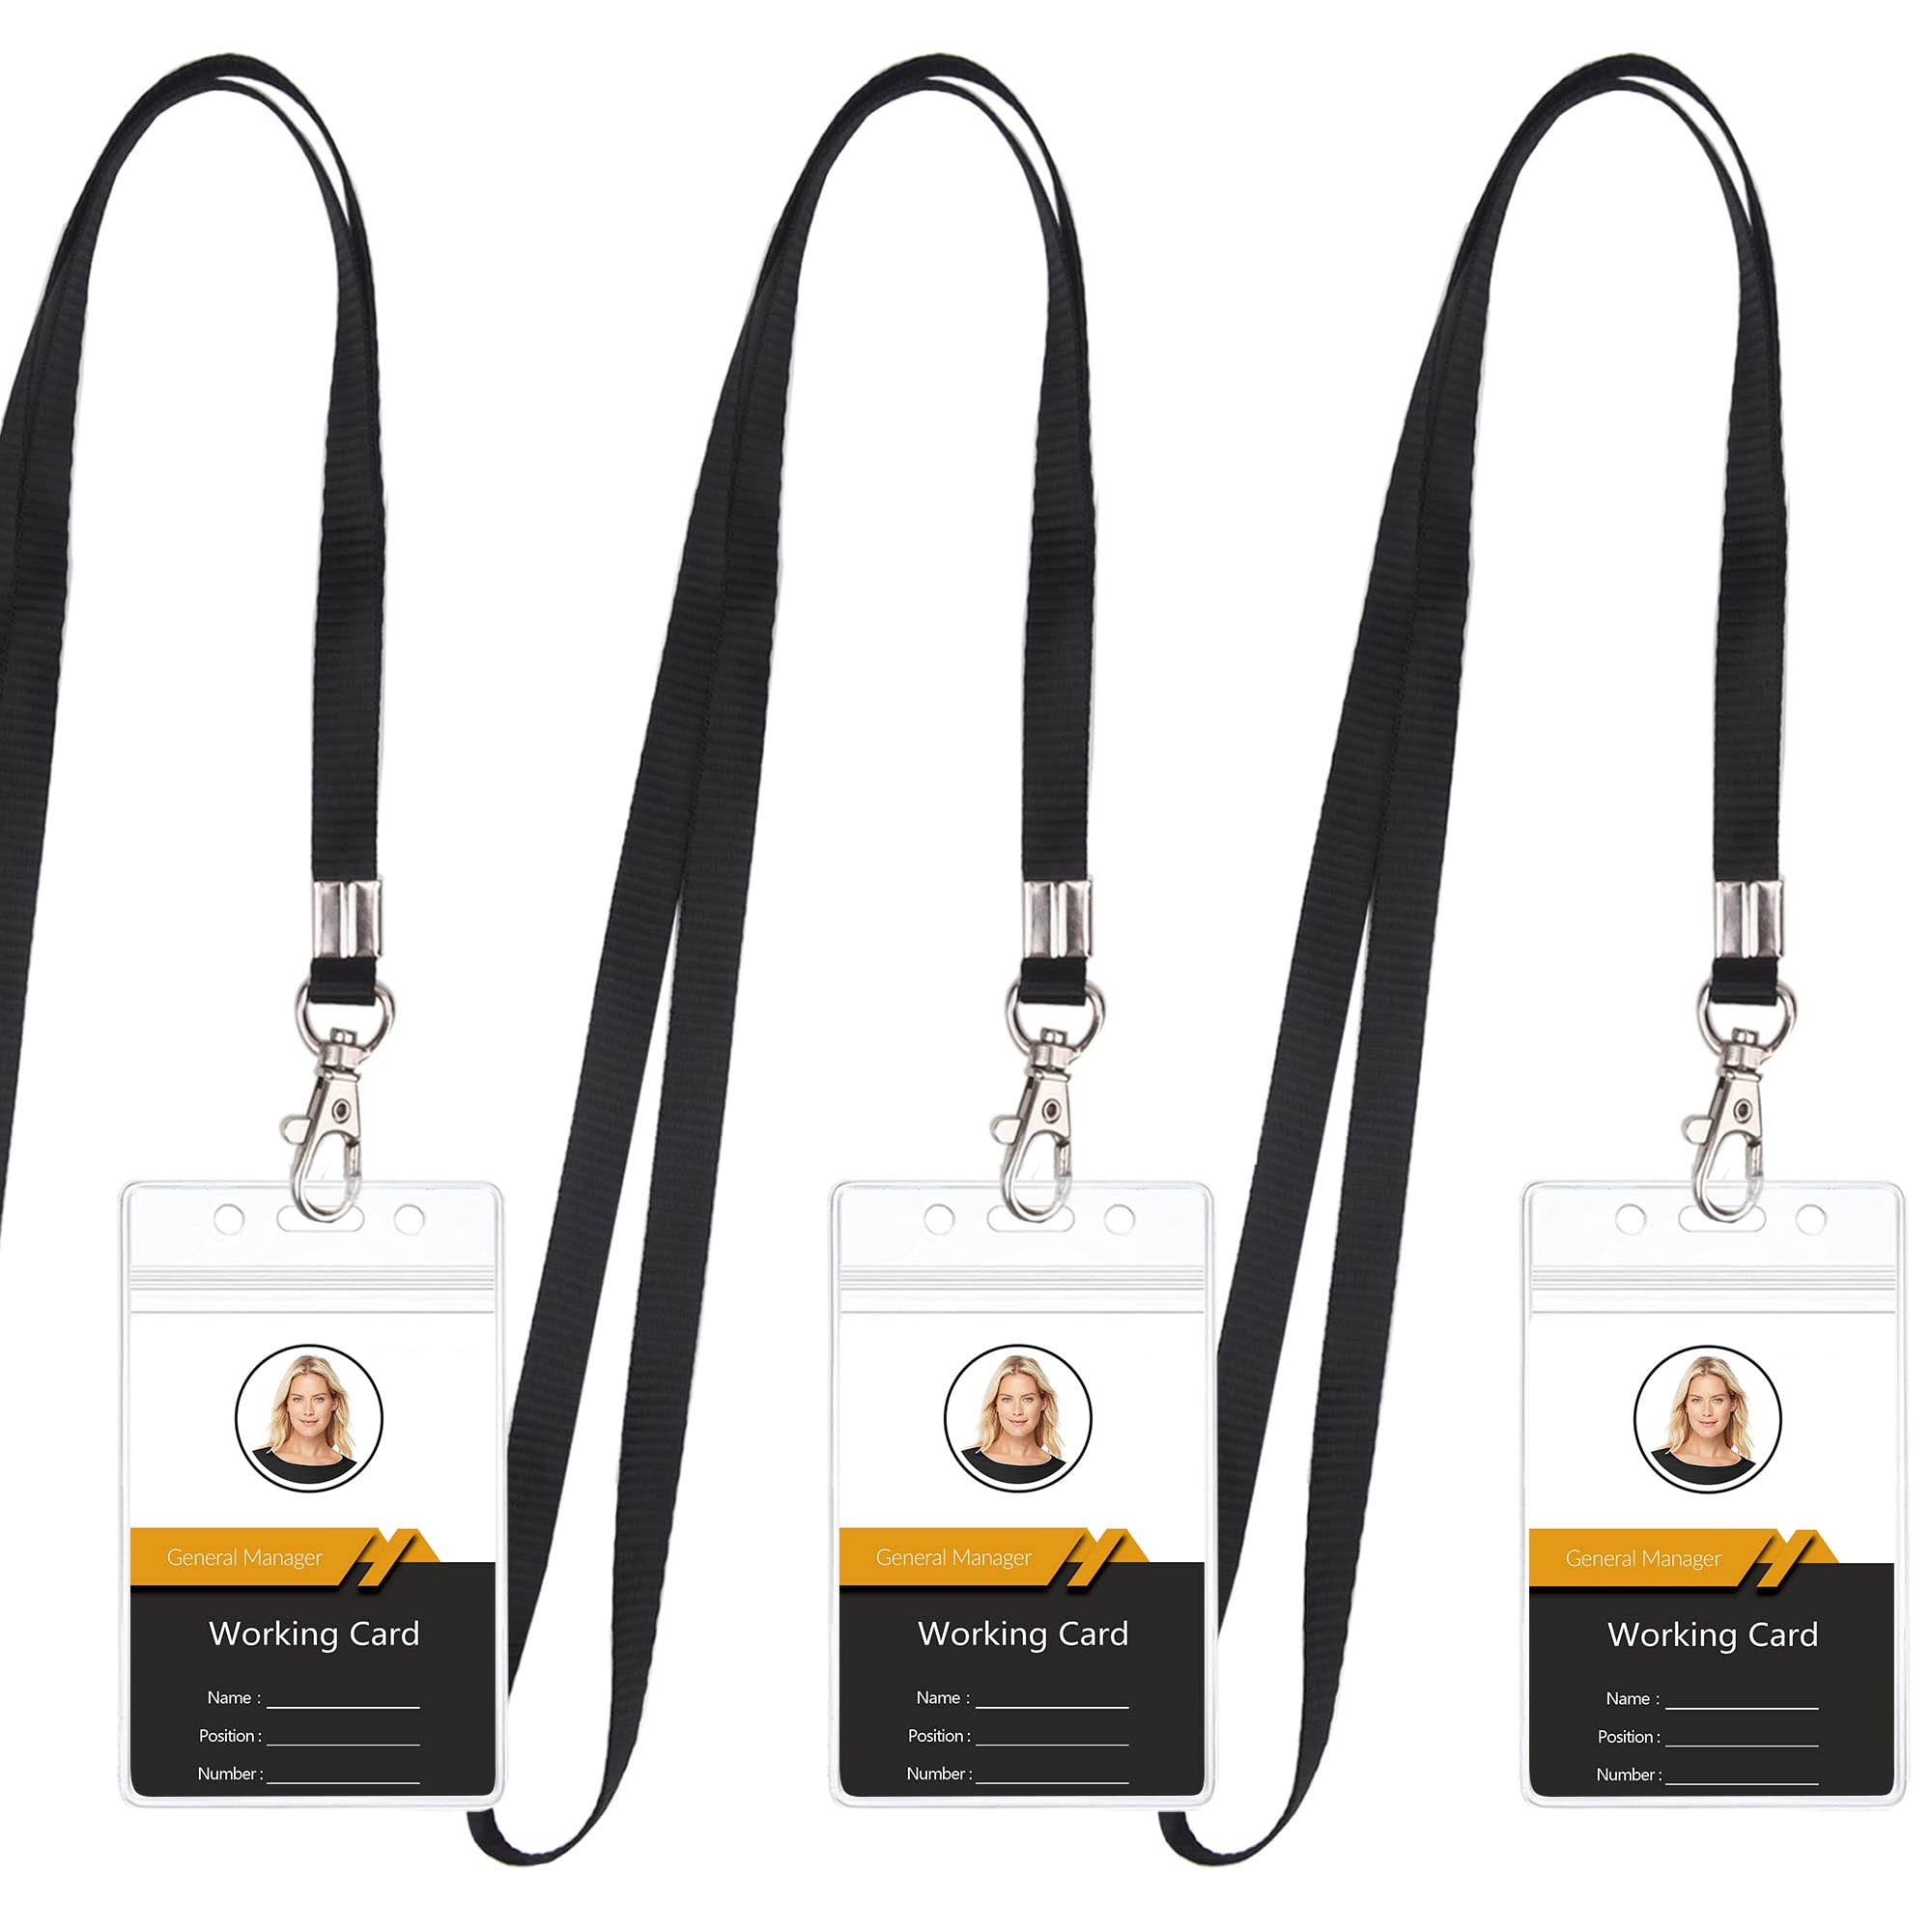 Student ID card holder soft PVC plastic transparent horizontal and vertical Workers business card holder with Lanyard